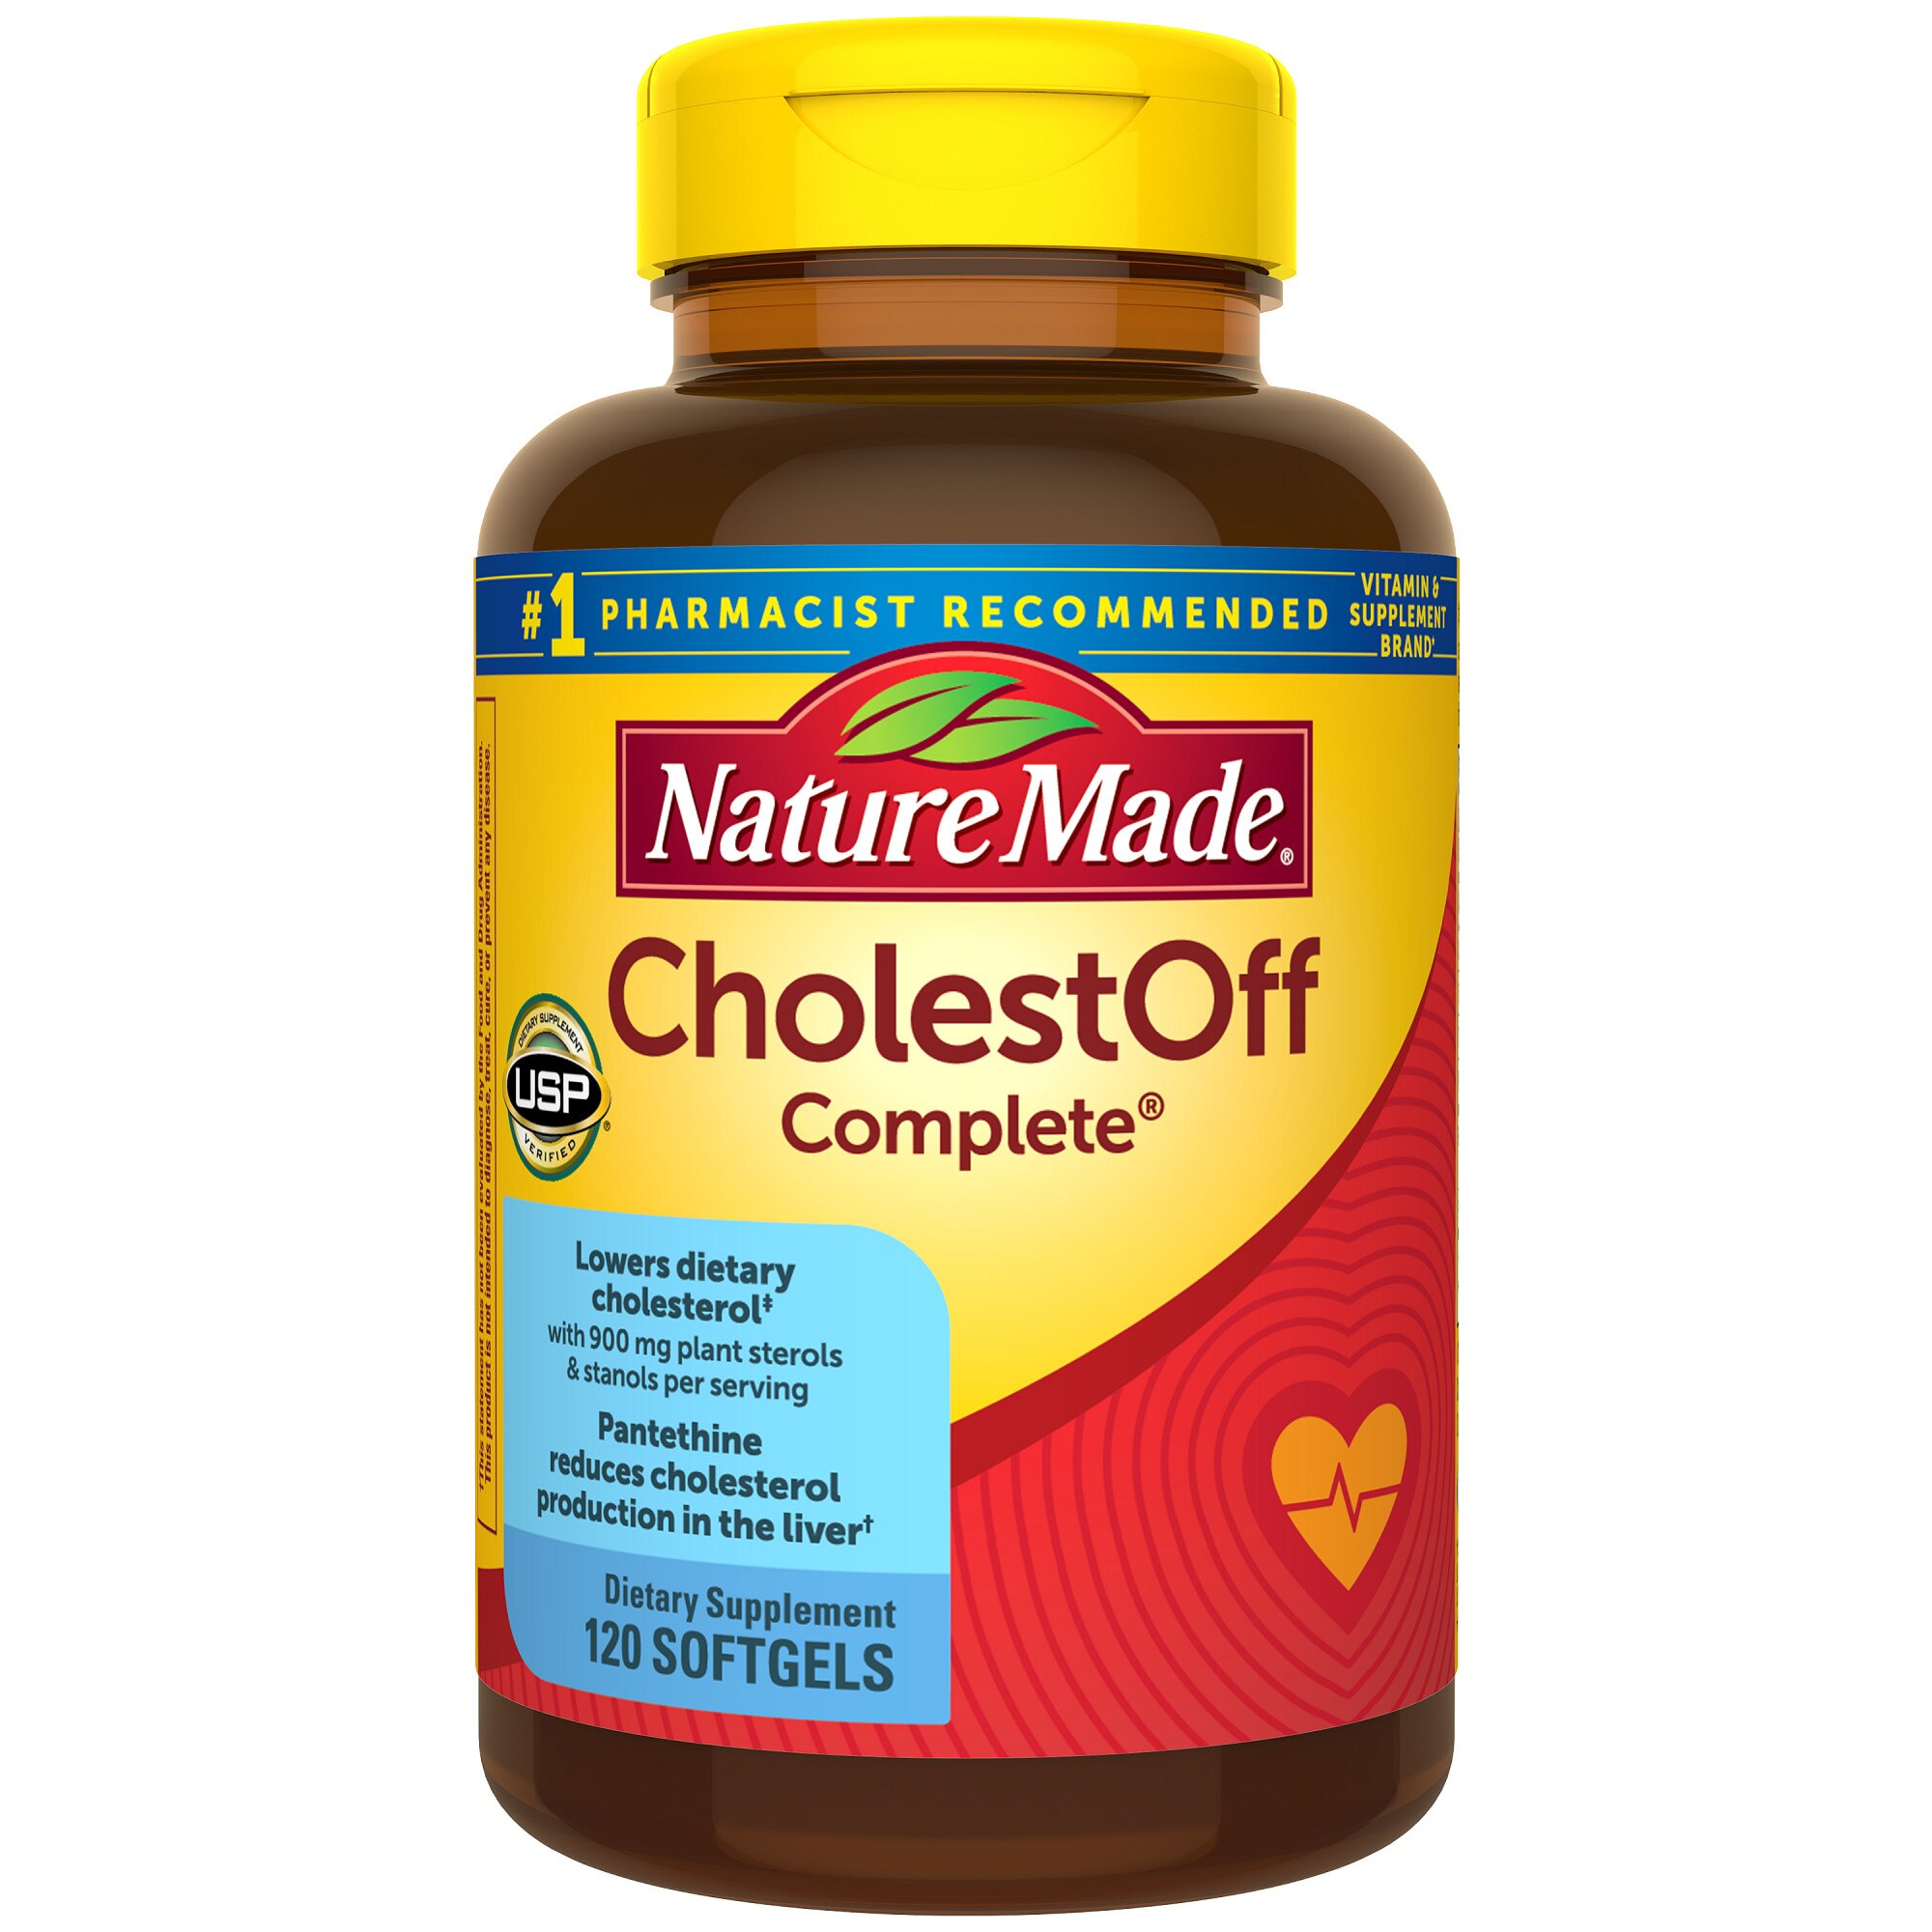 Nature Made CholestOff Complete Softgels, 120CT